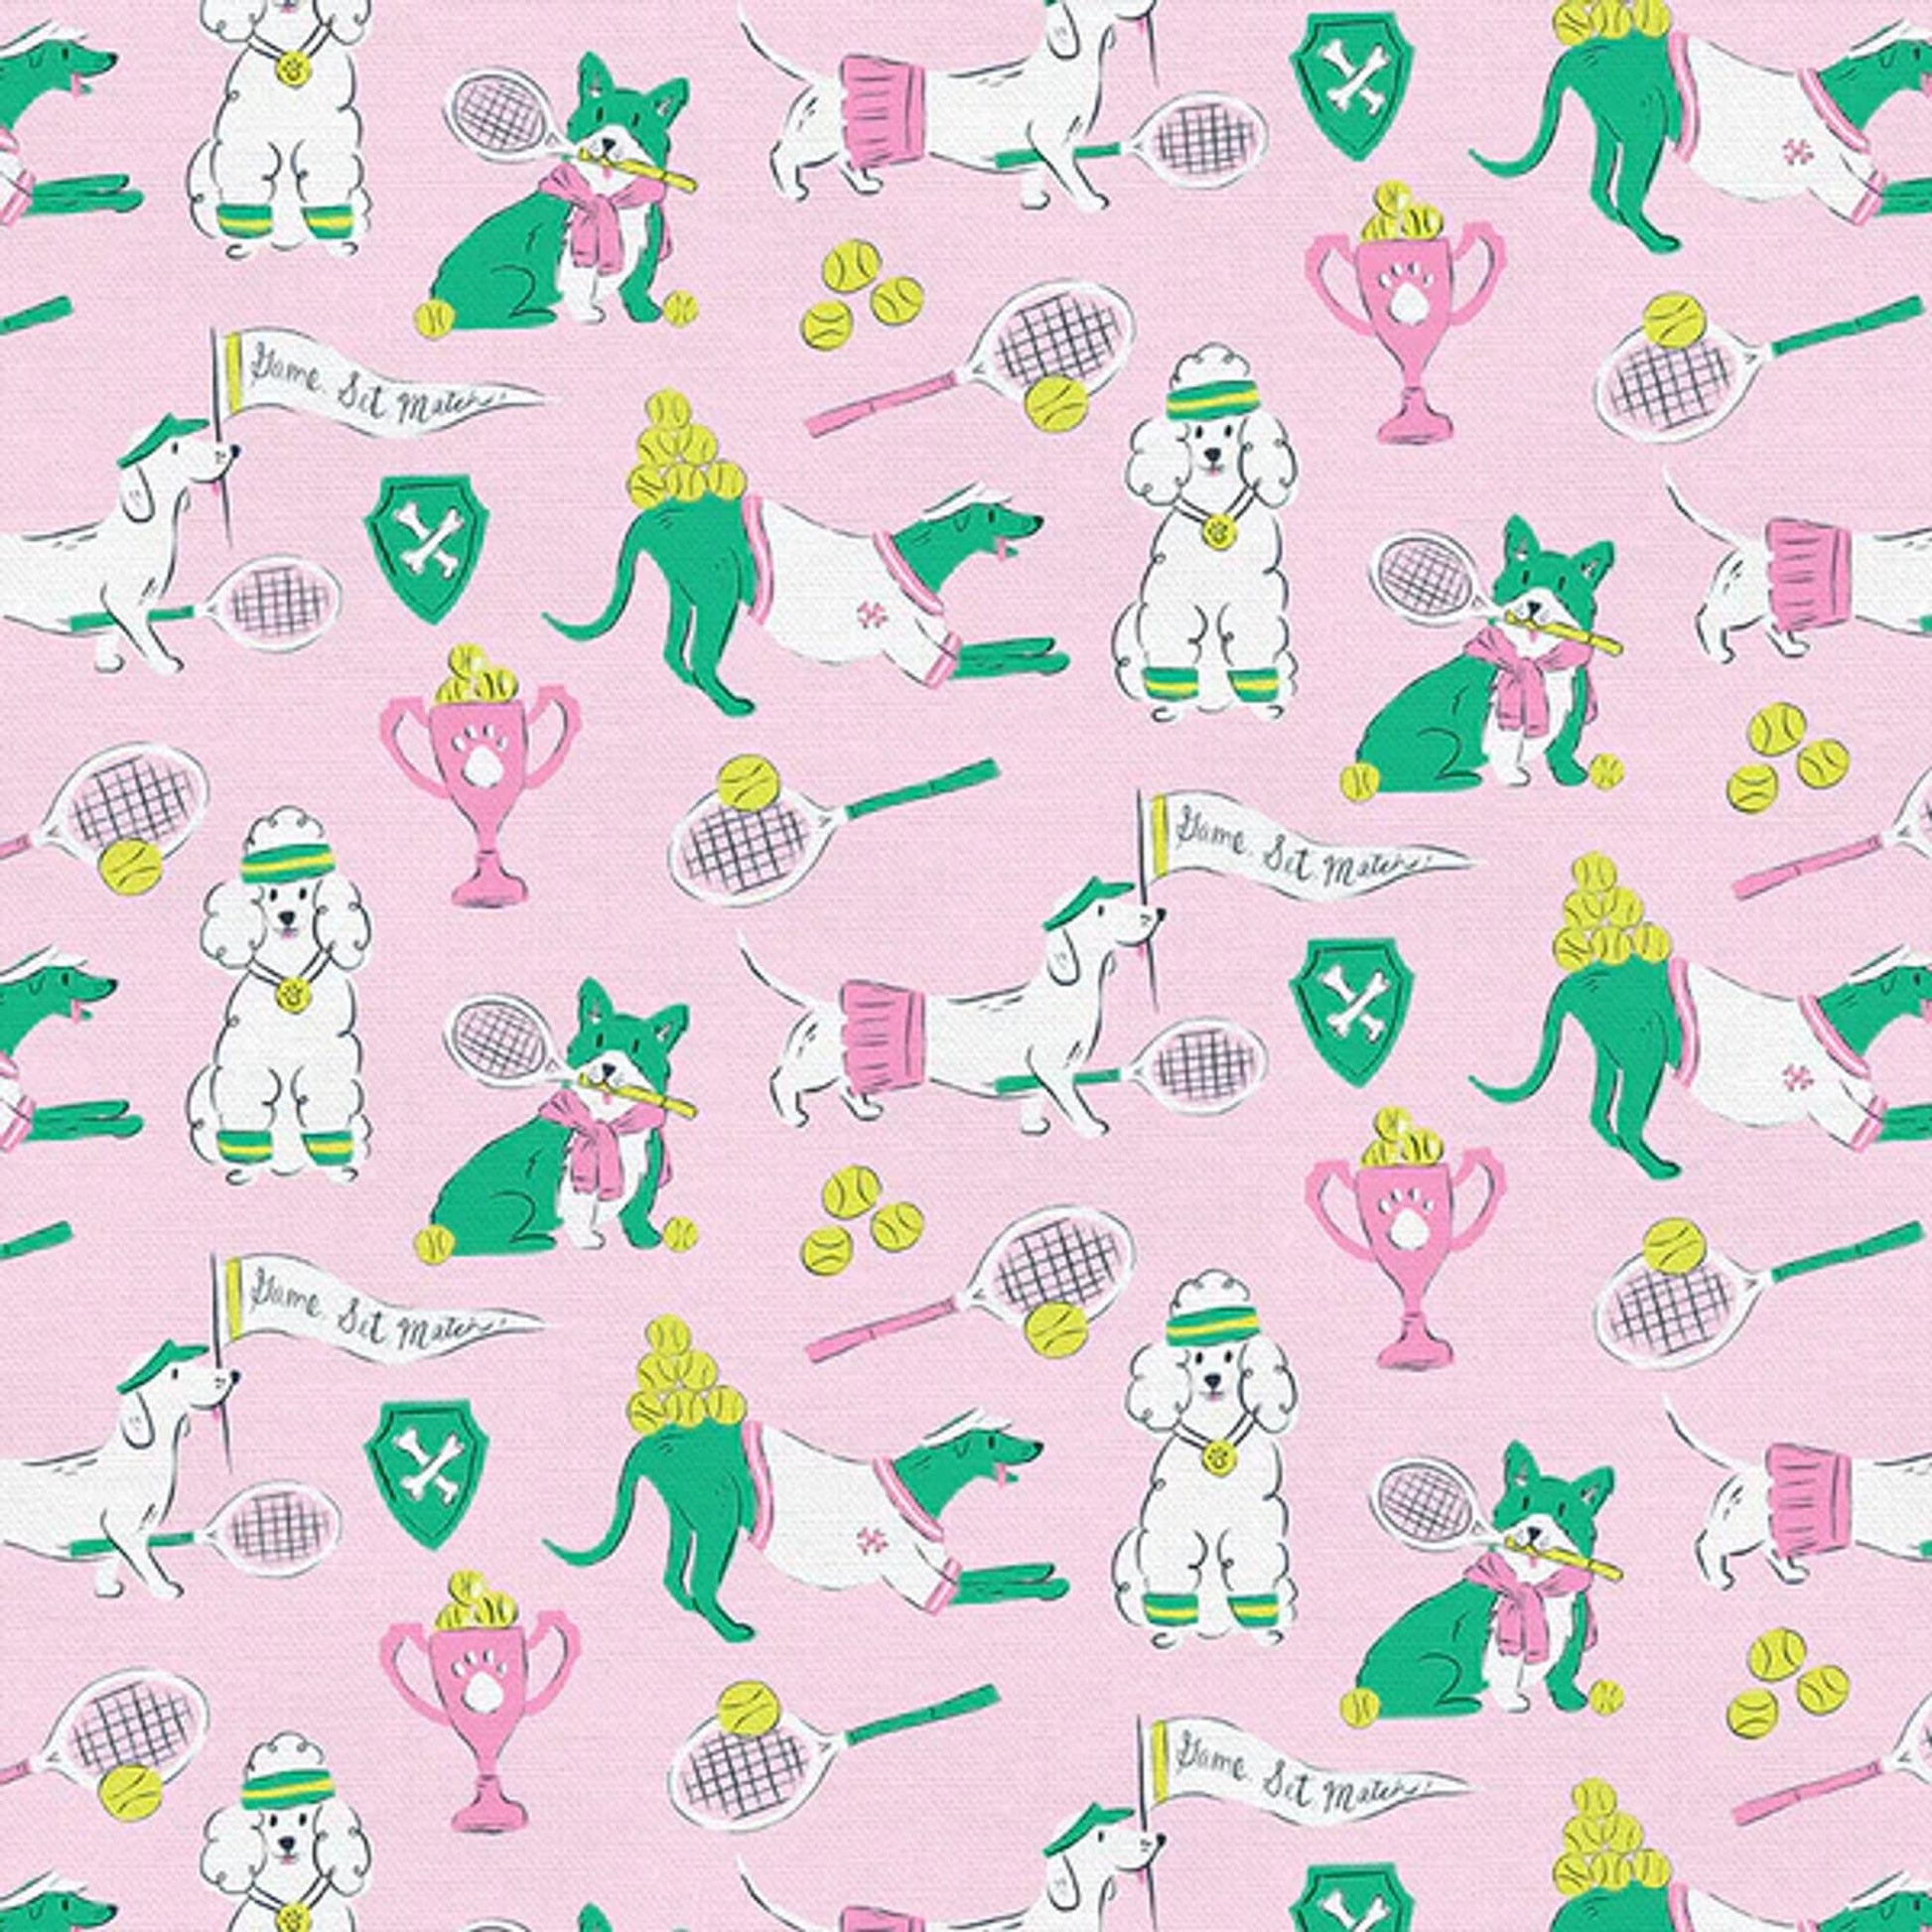 Game Set Match Light Pink Country Club Canines Krissy Mast Paintbrush Studio Fabric 100% Quilters Cotton 120 24736 Fabric Fetish